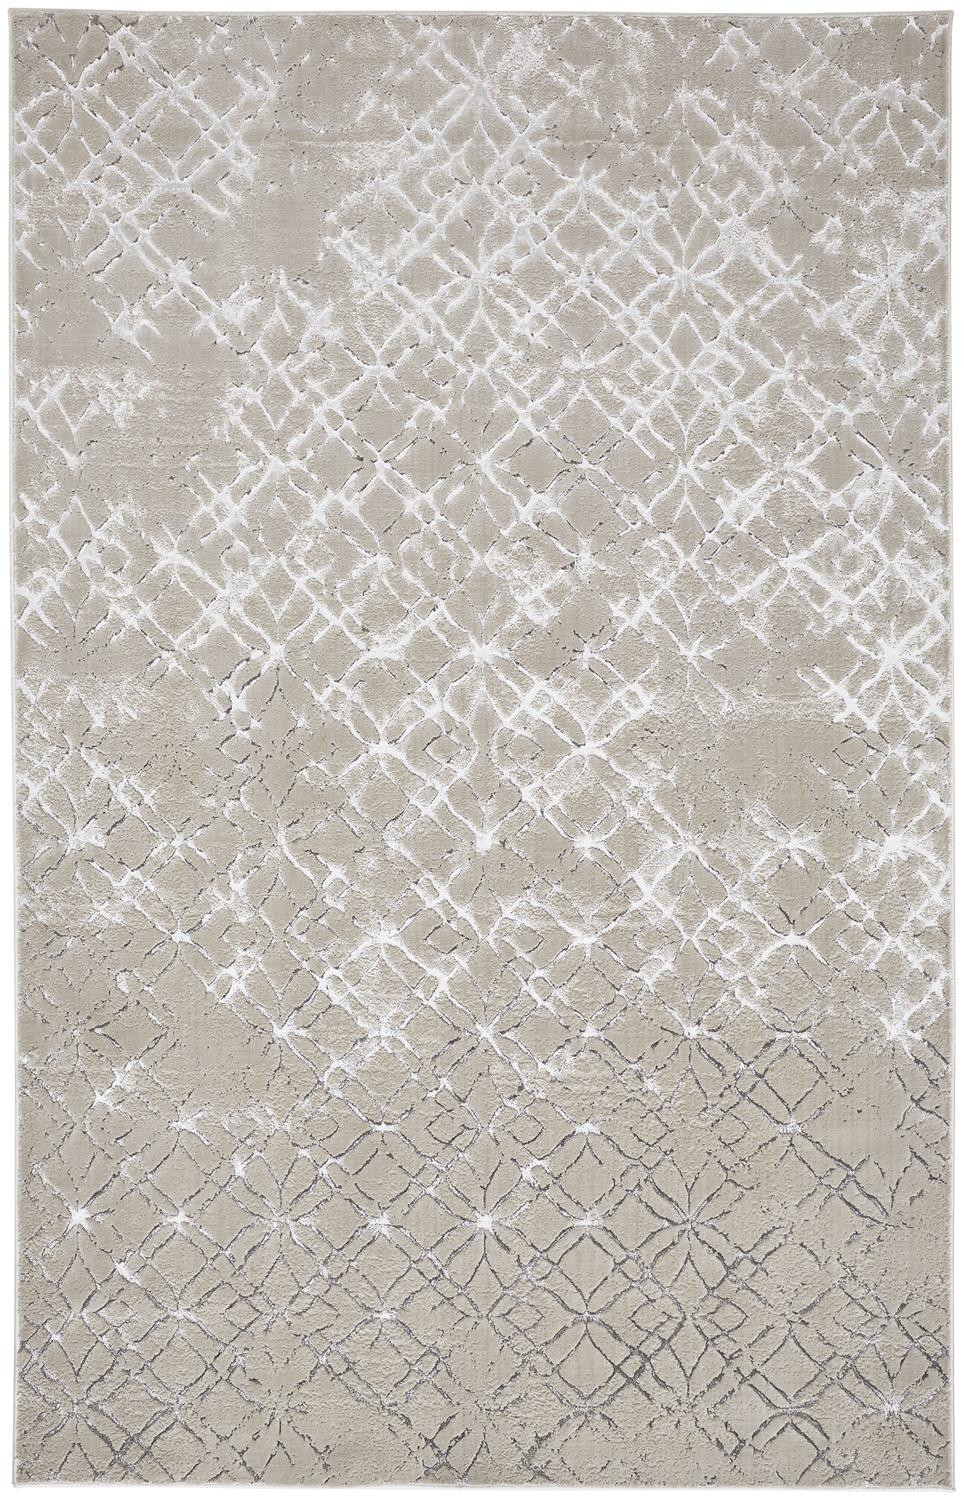 7' X 10' Silver Gray And White Abstract Stain Resistant Area Rug-511497-1